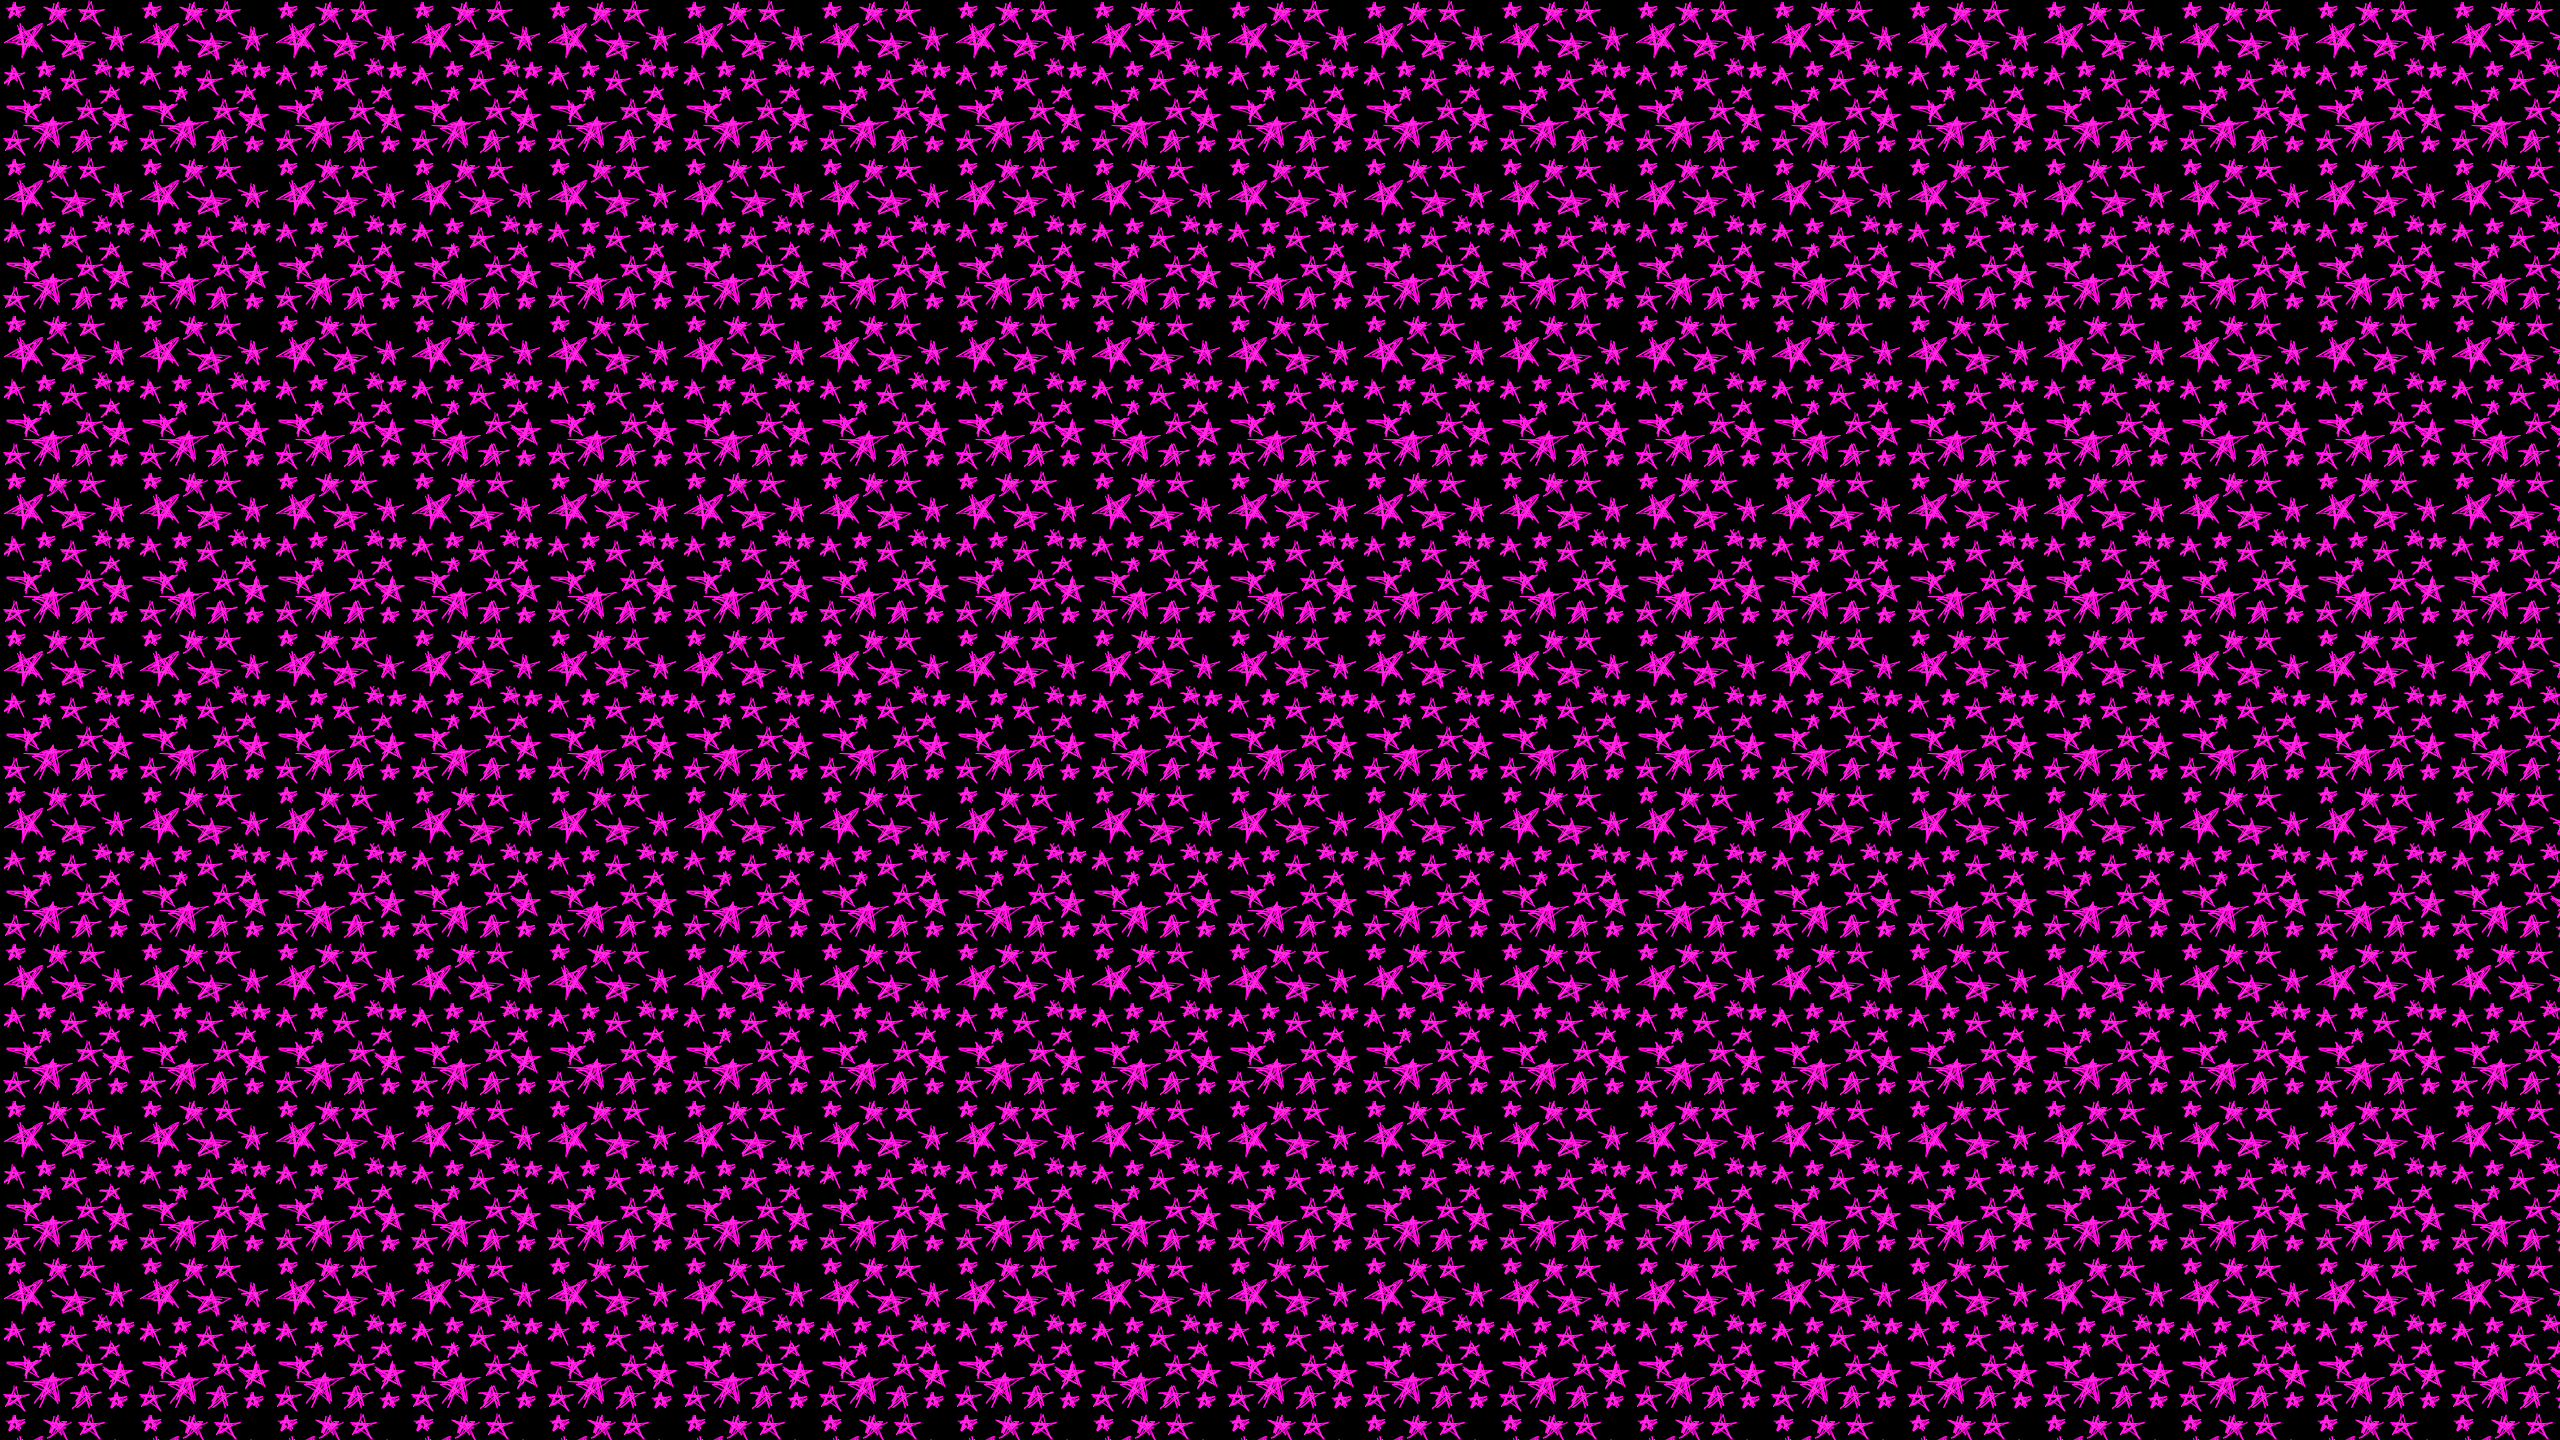 Pink Crayon Stars Desktop Wallpaper Is Easy Just Save The